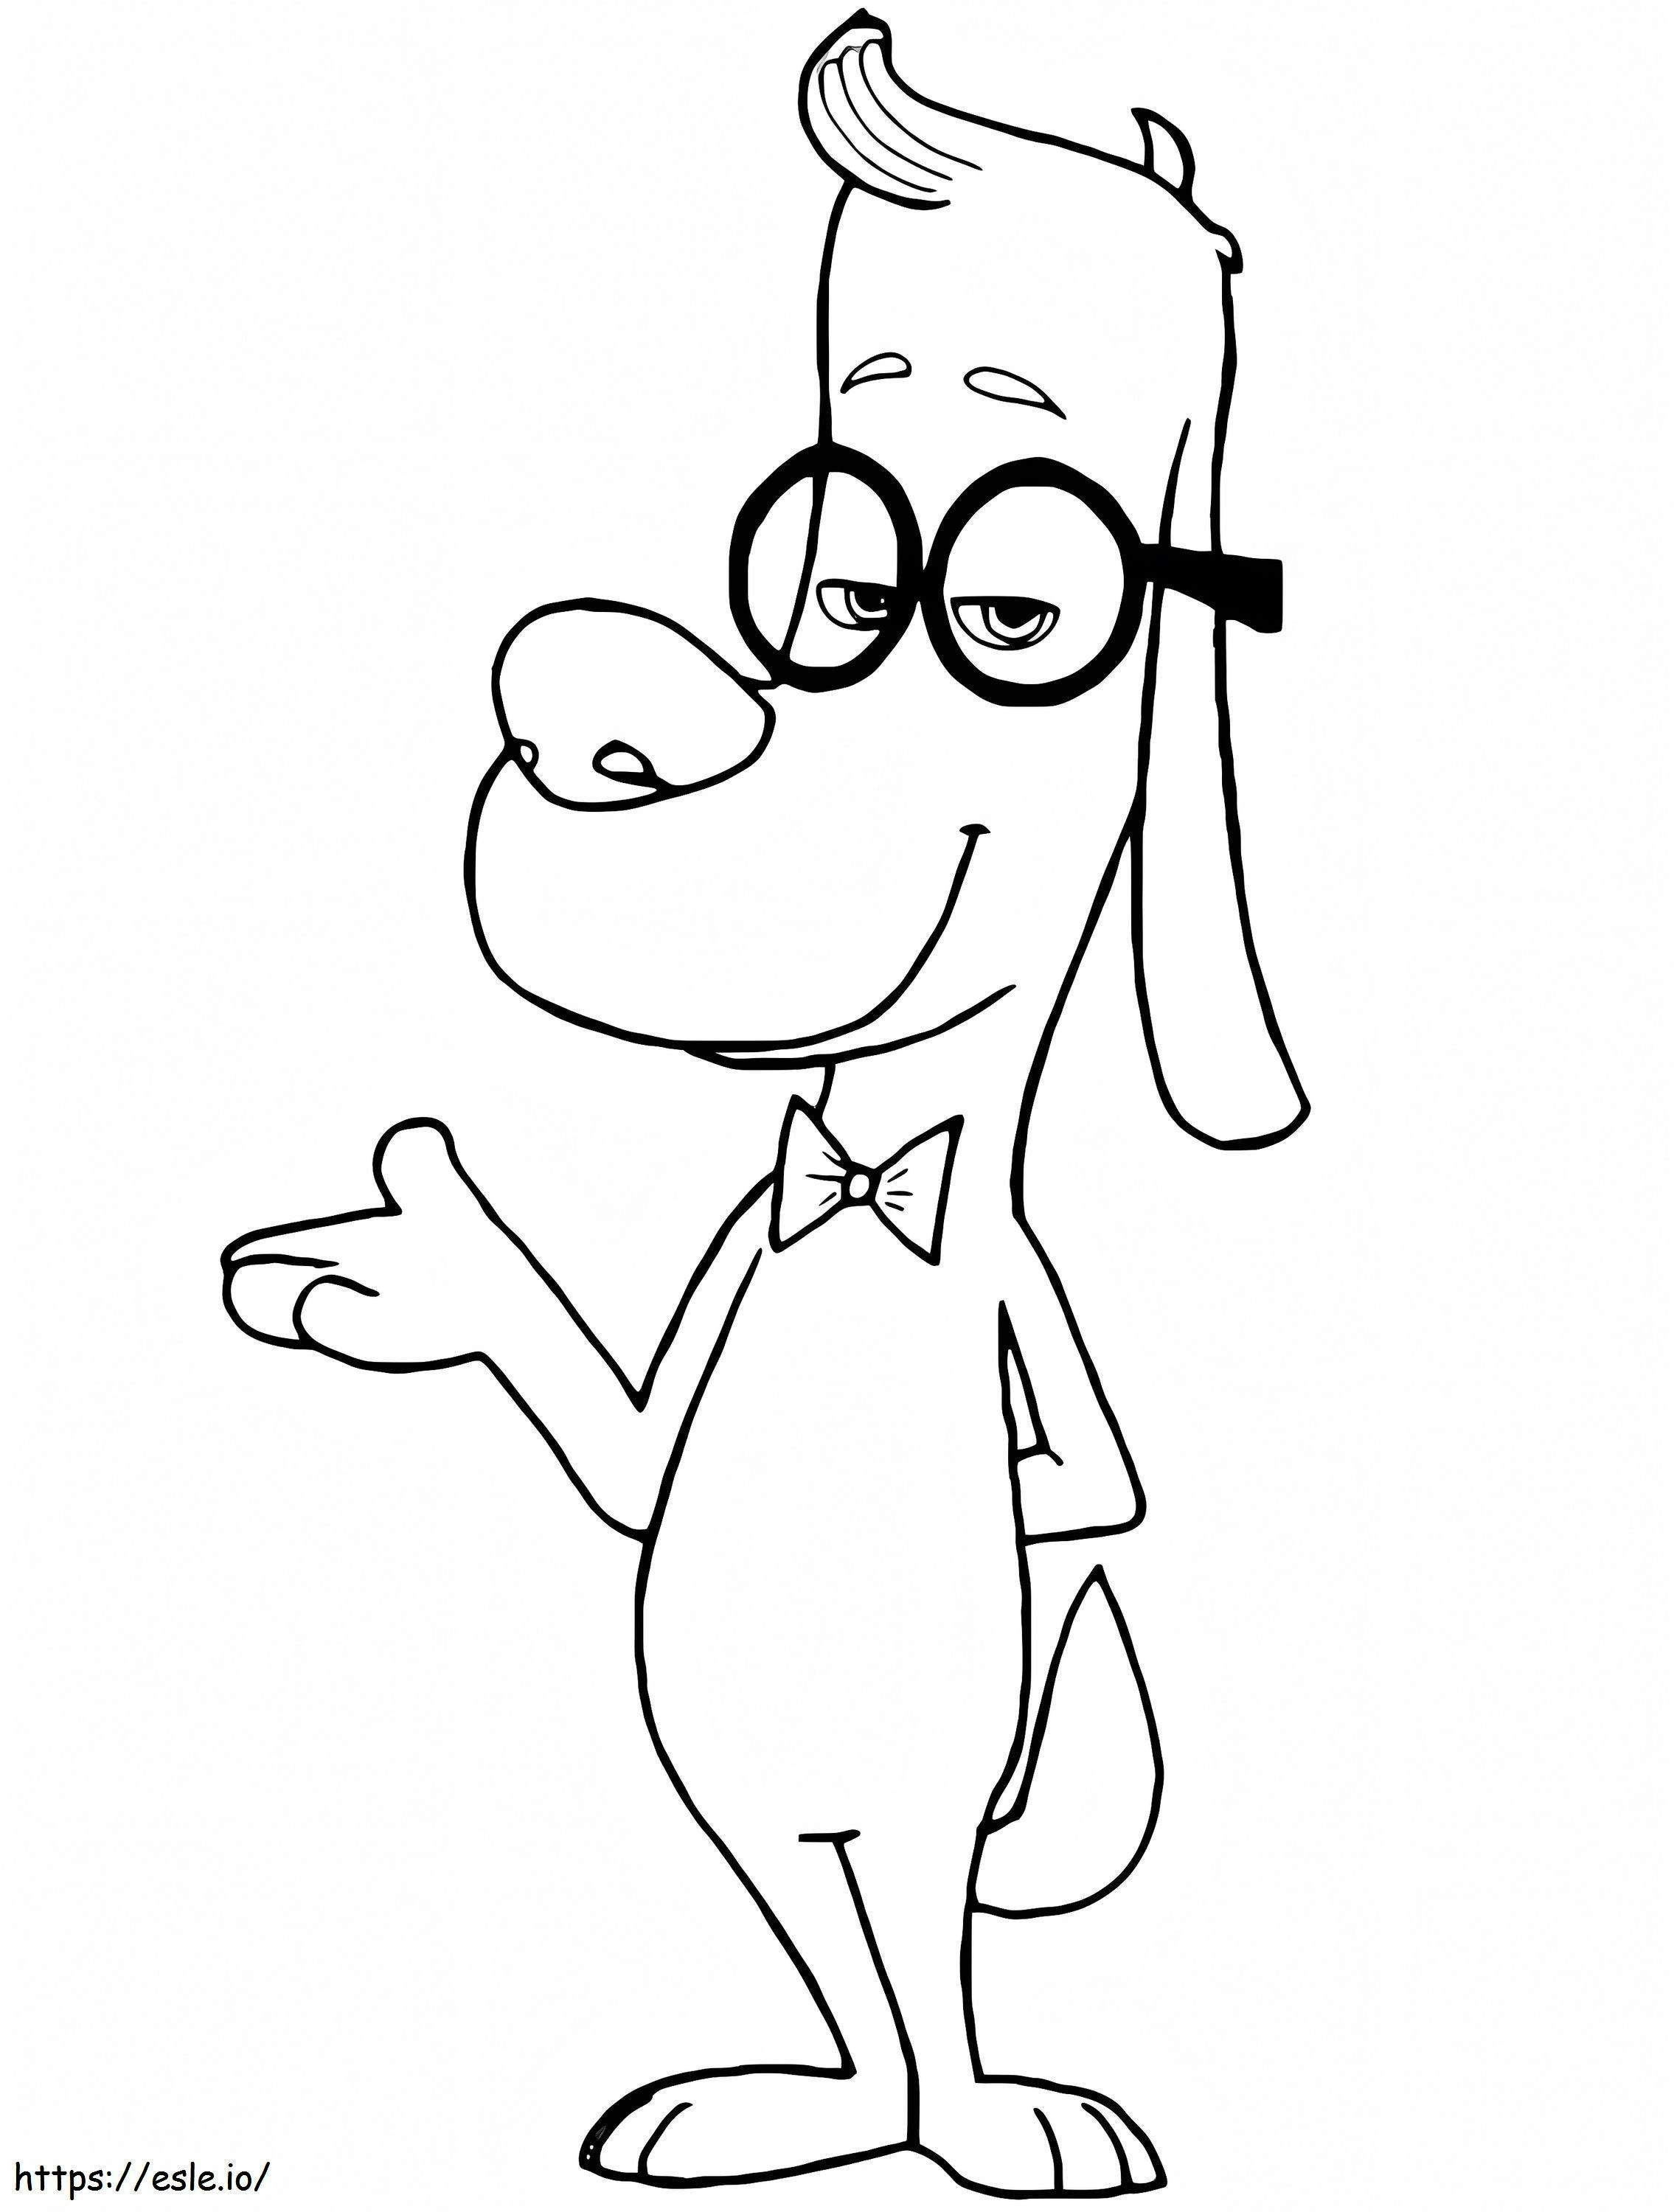 Mr. Peabody coloring page